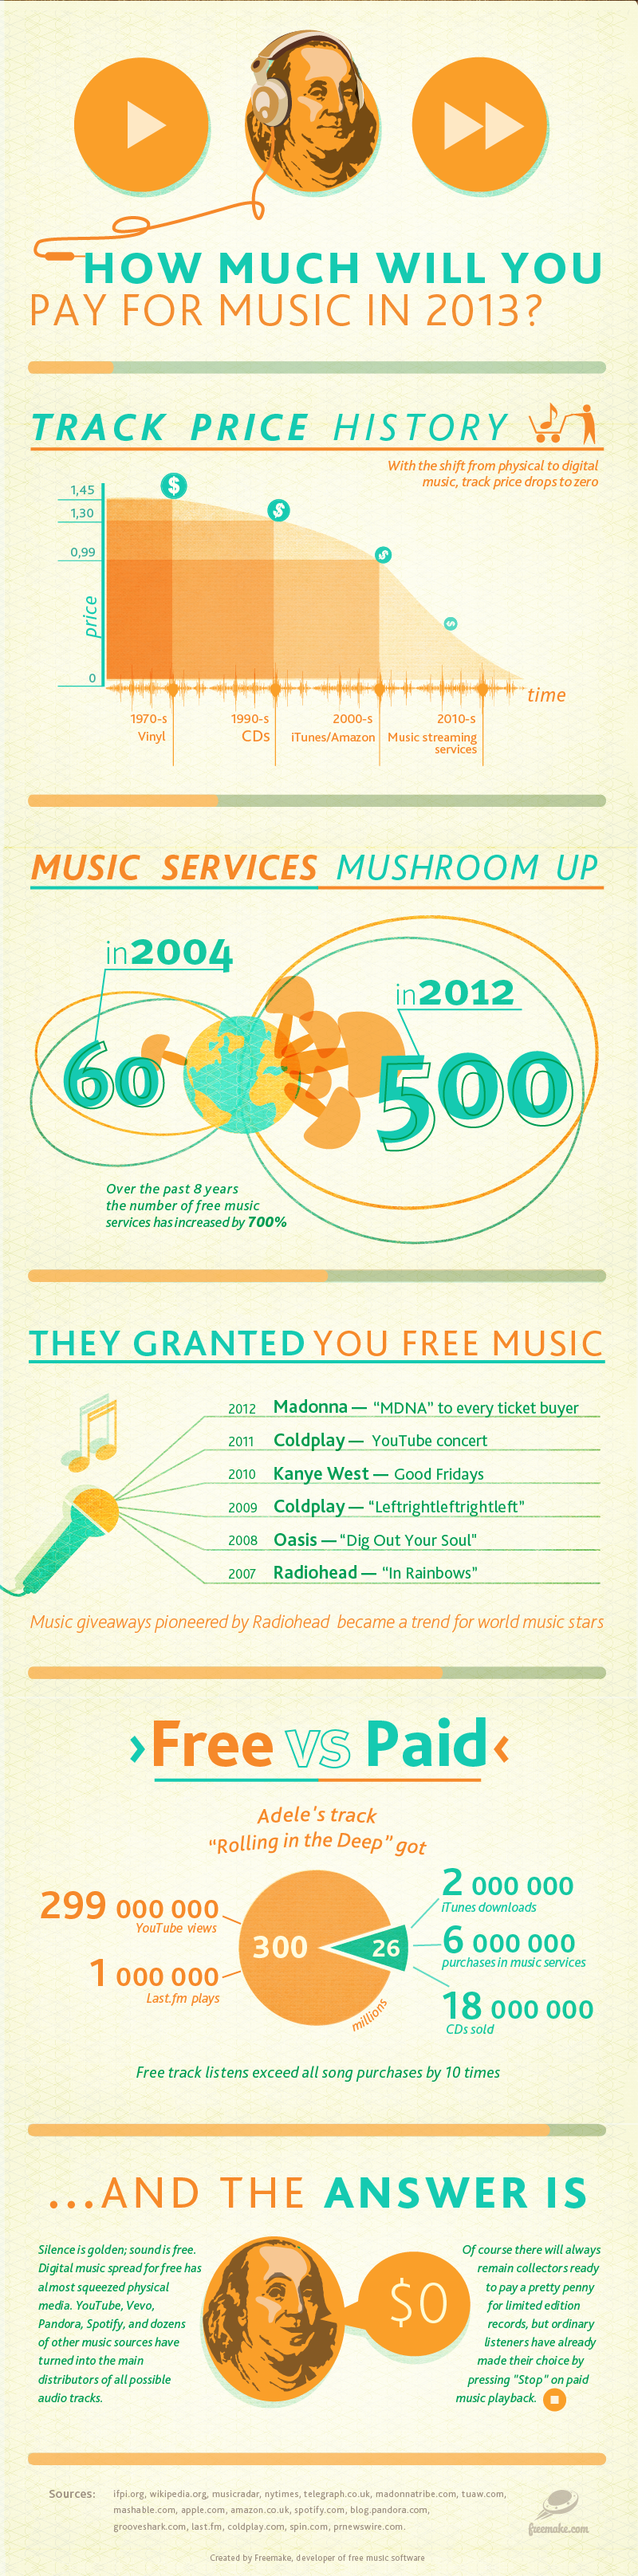 How Much Will You Pay for Music in 2013?